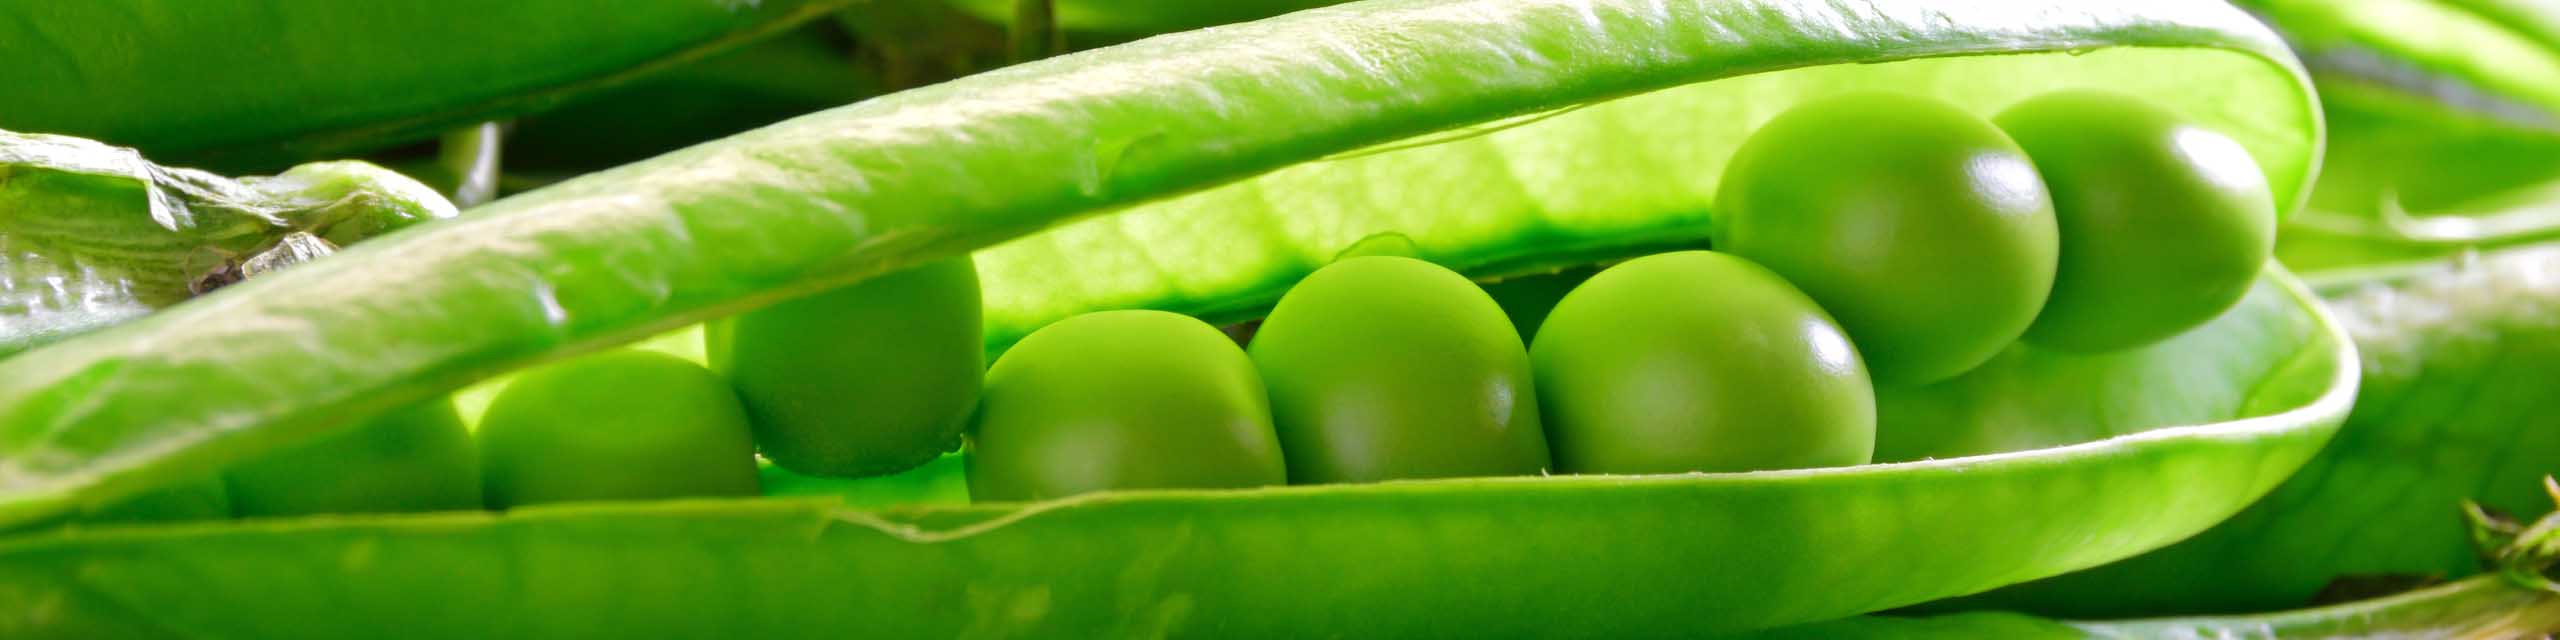 Close up of an open pea pod showing fresh peas inside.